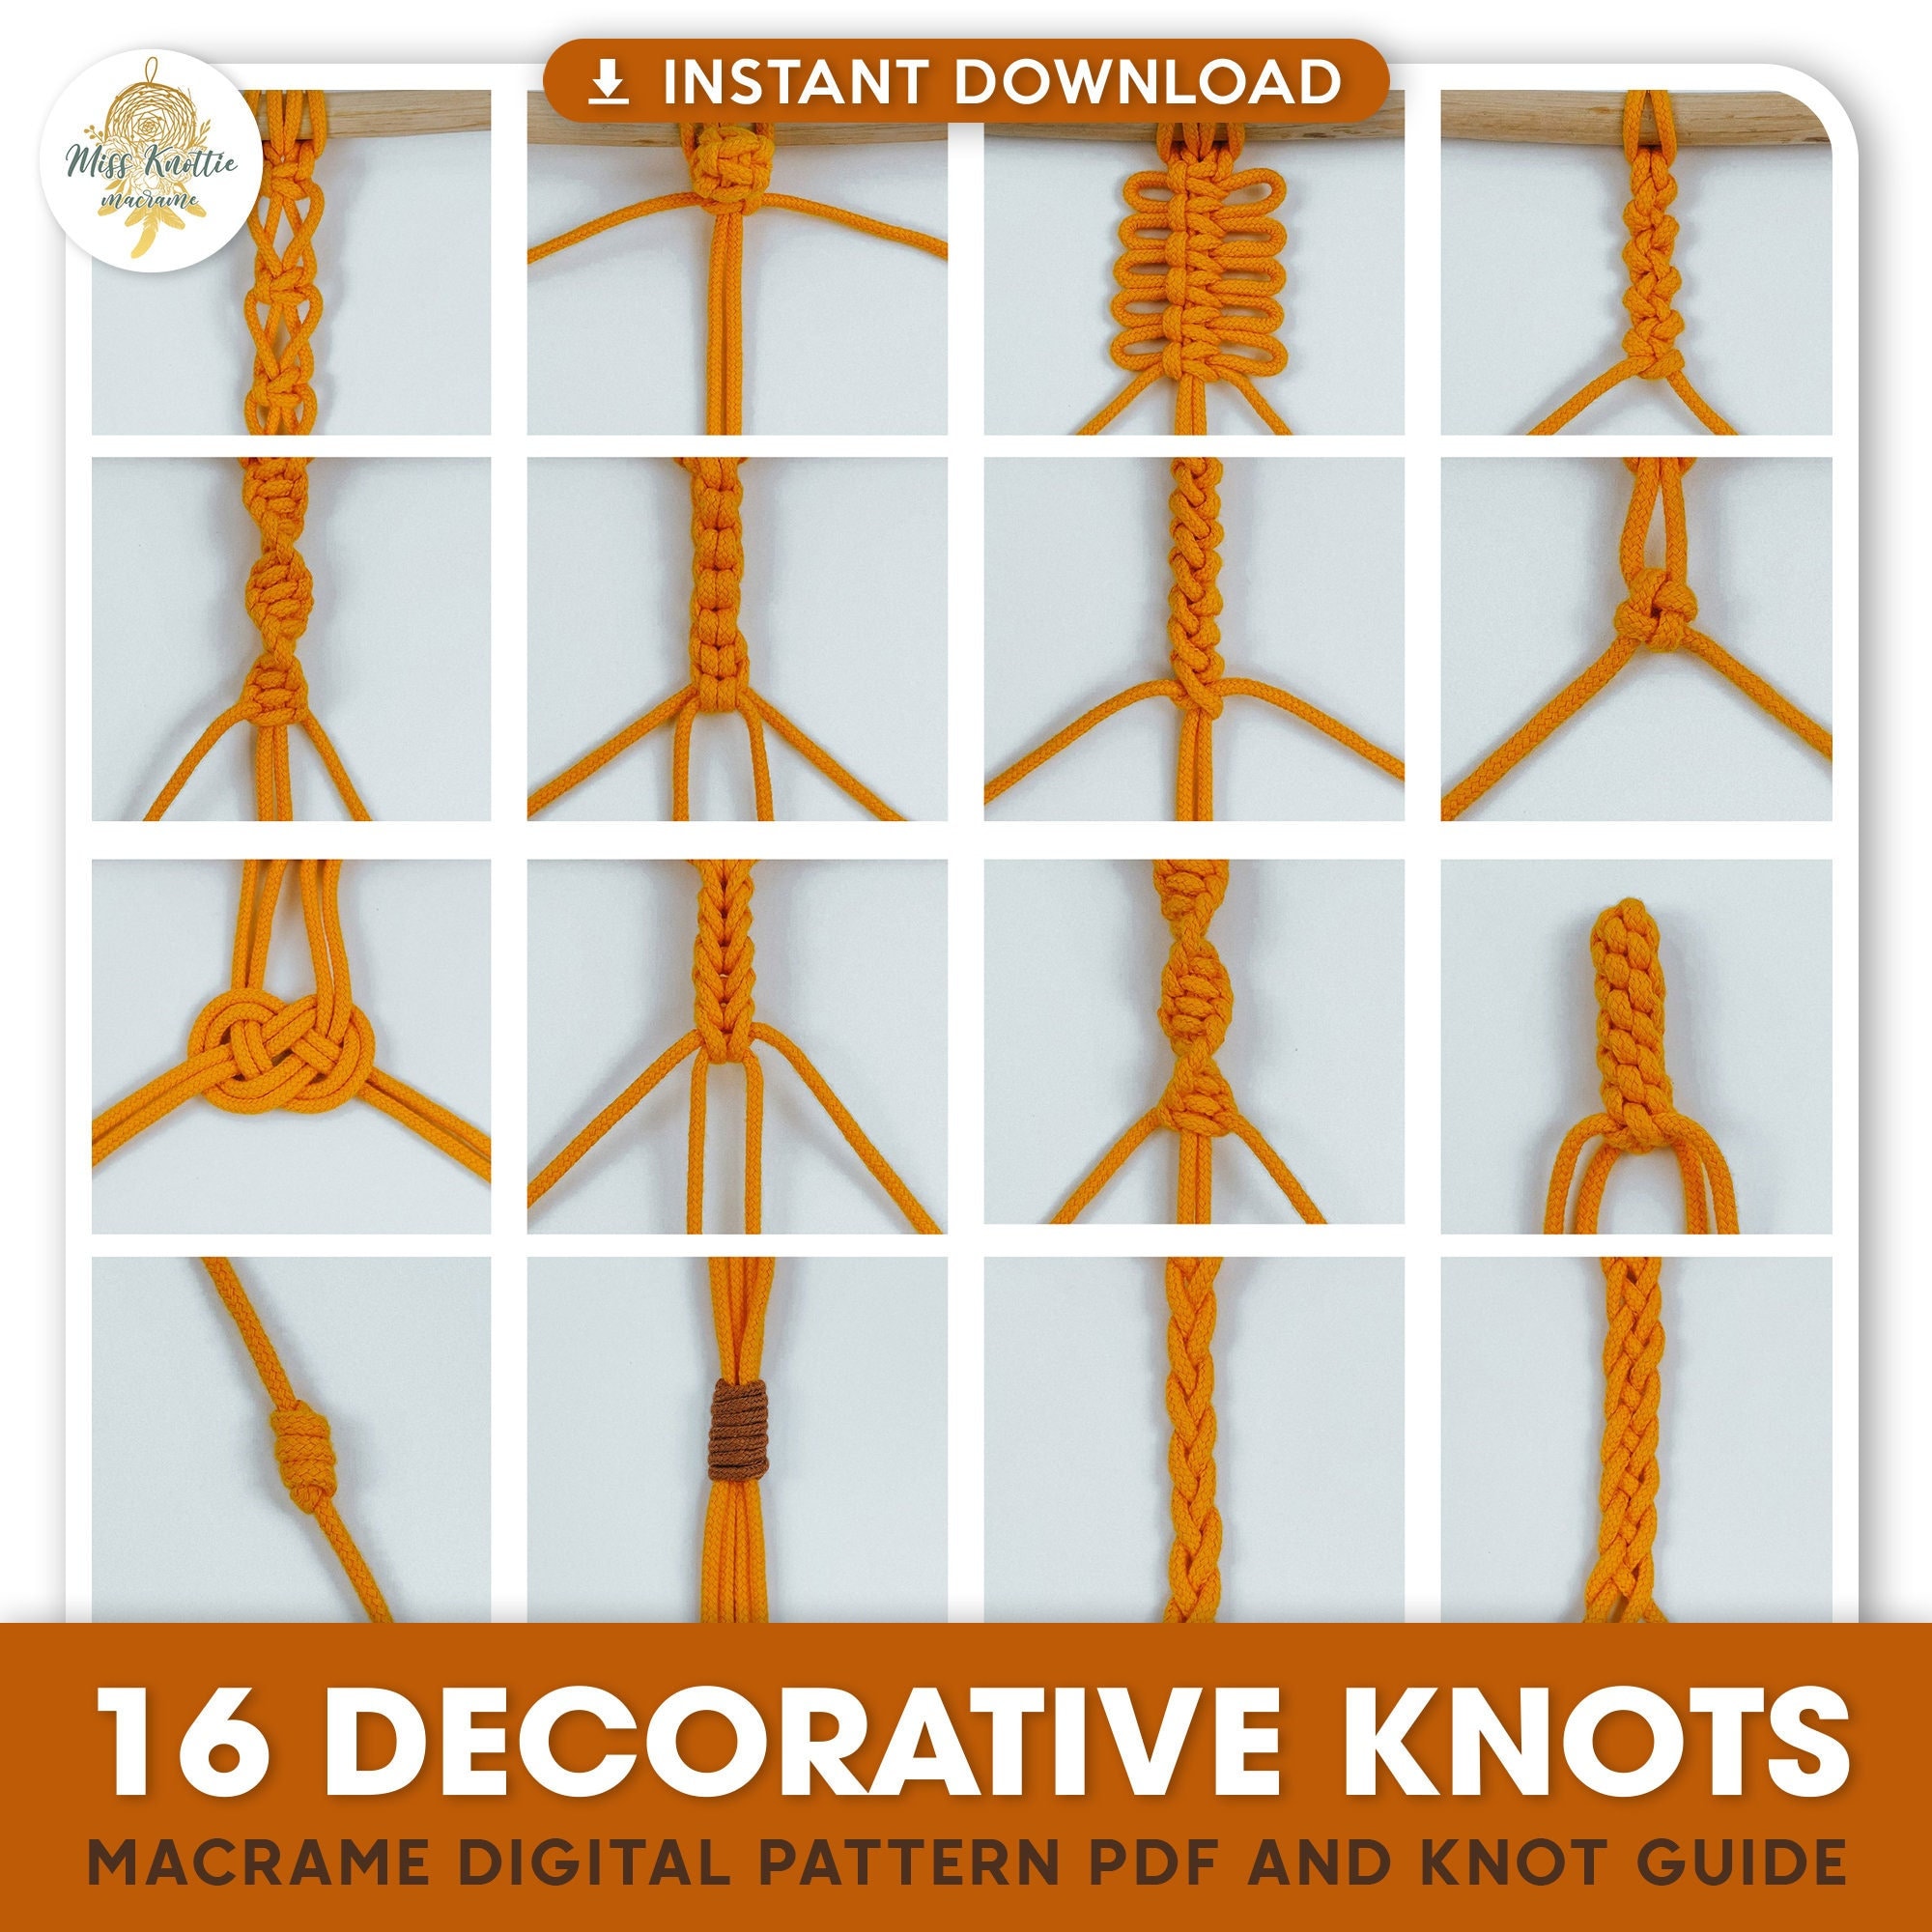 Macrame Decorative Knot Guide PDF With 16 Knots Explained, Knot Tutorial  for Beginners , Step by Step Instructions With Photos 